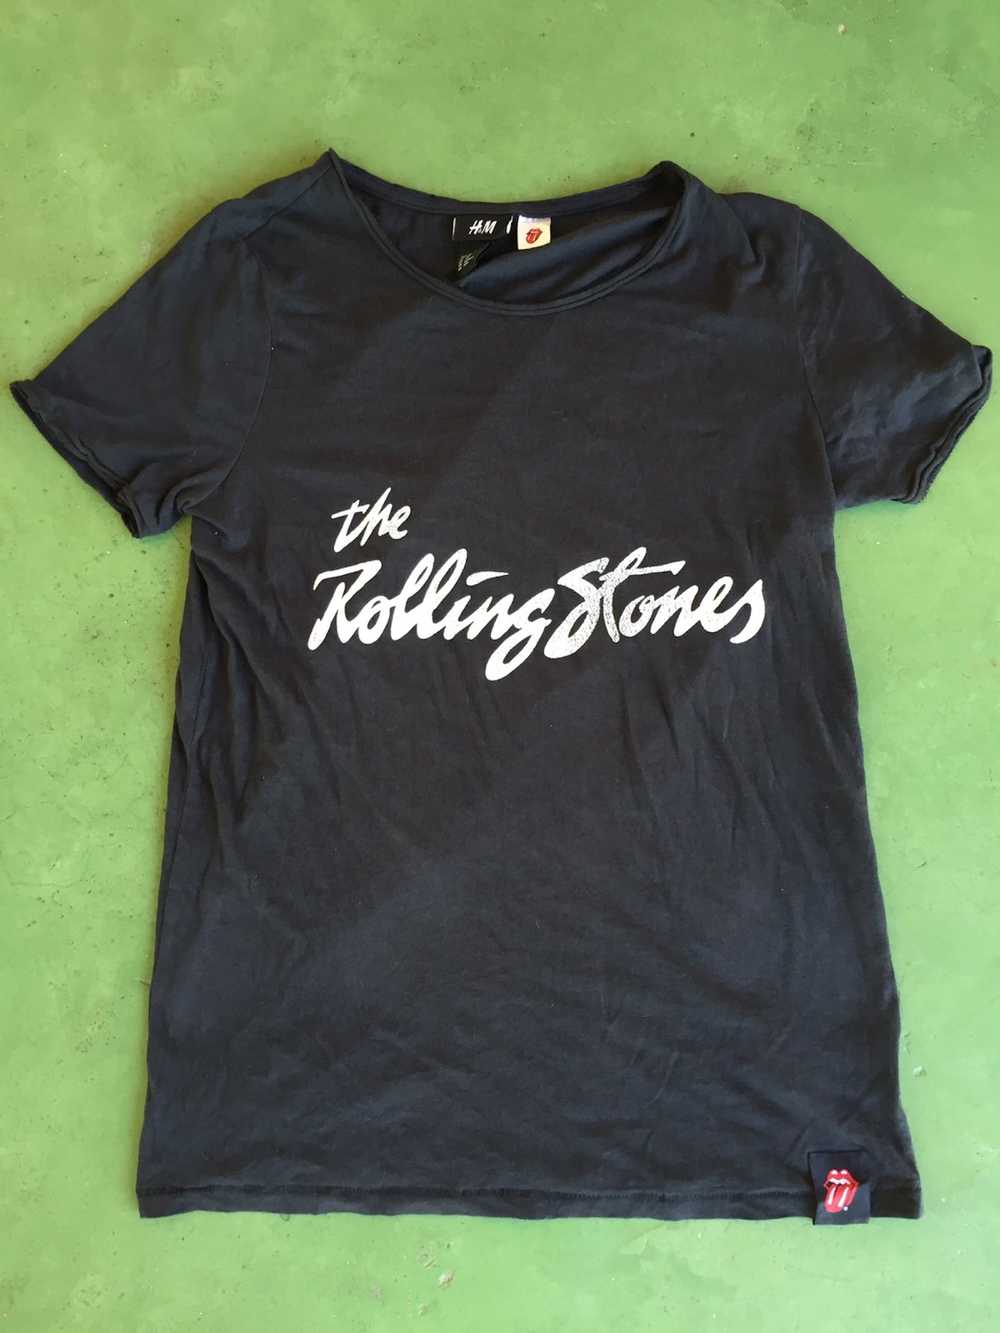 Band Tees H&M x The Rolling Stones tee - image 1